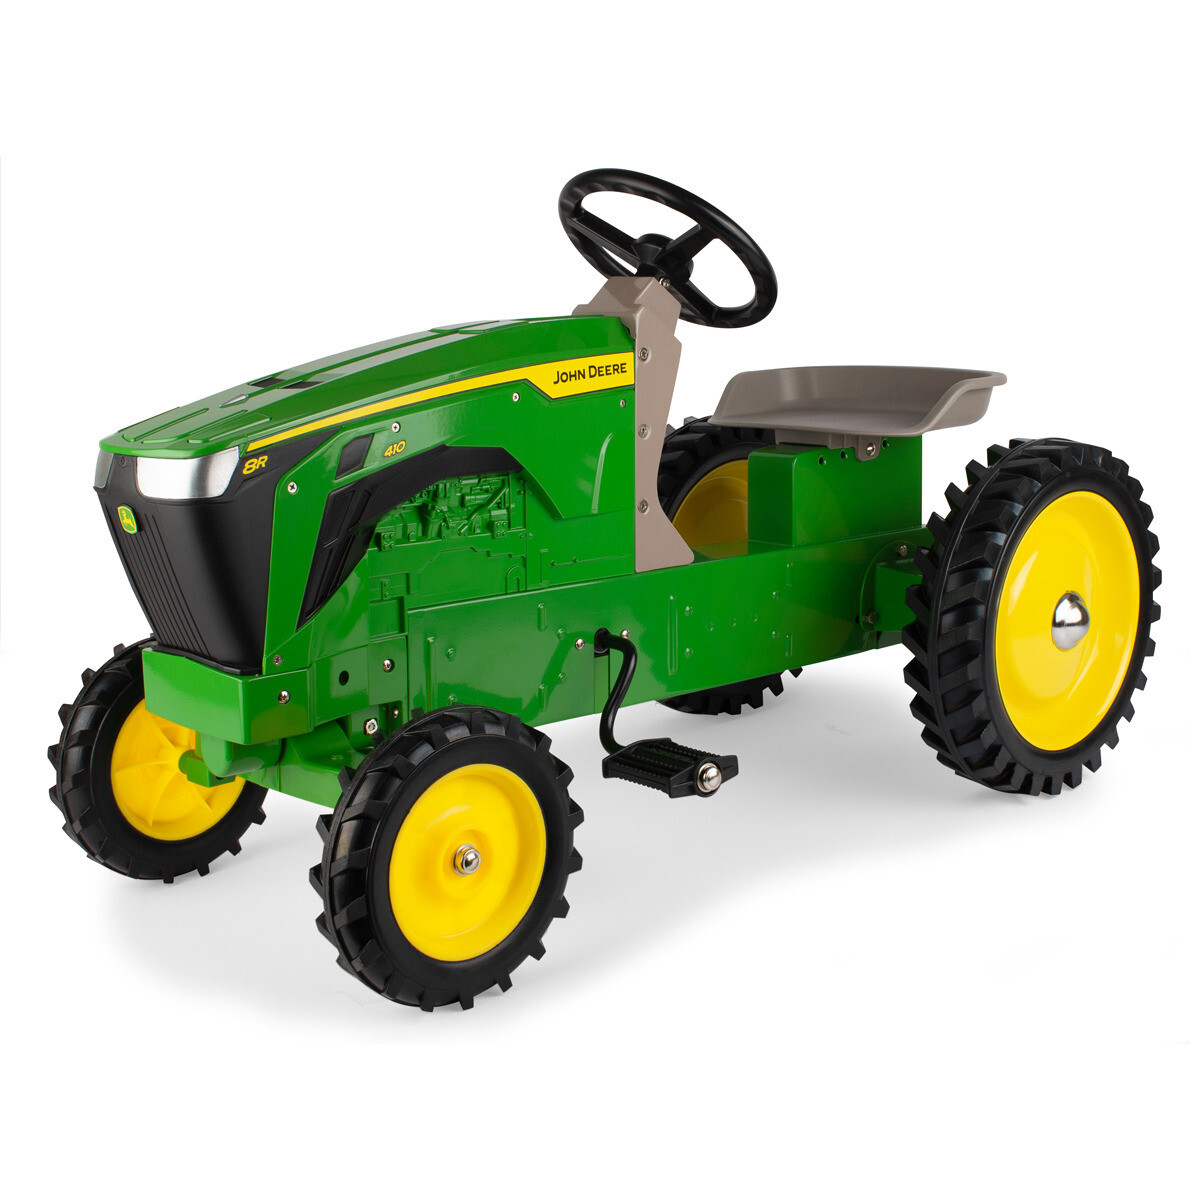 8R 410 PEDAL TRACTOR